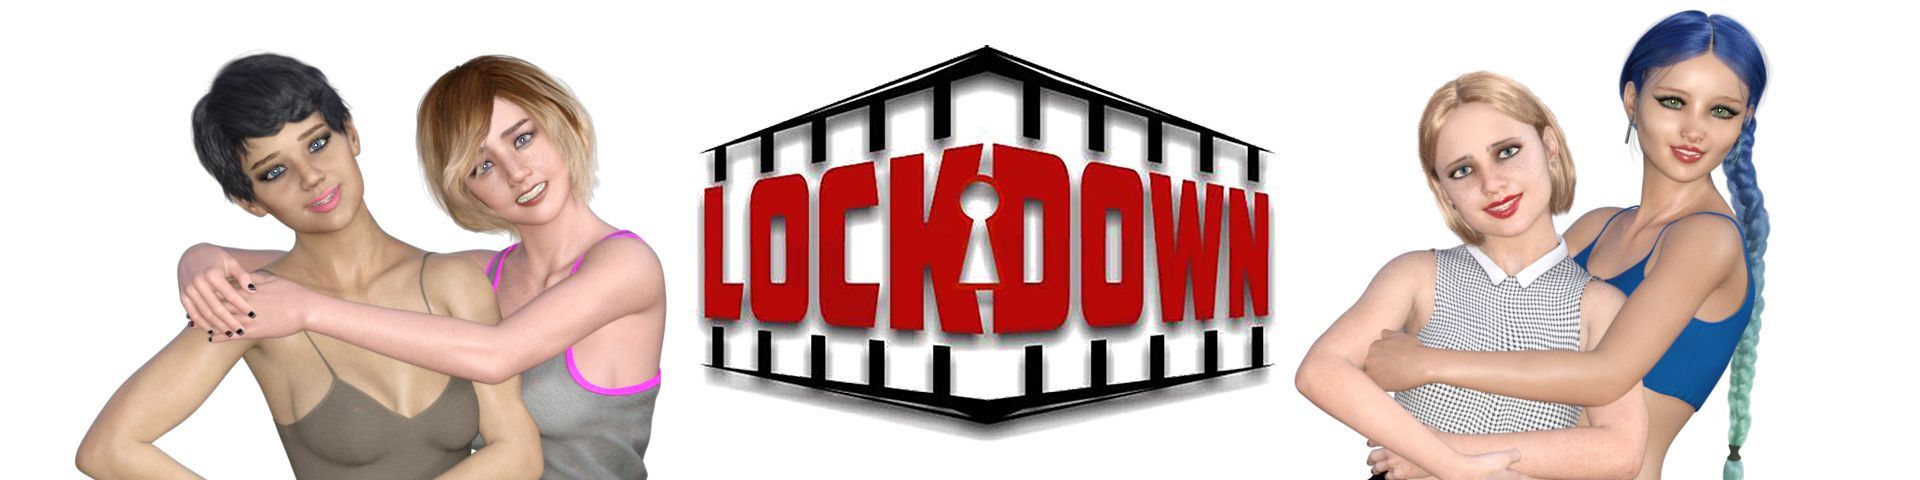 Lockdown porn xxx game download cover